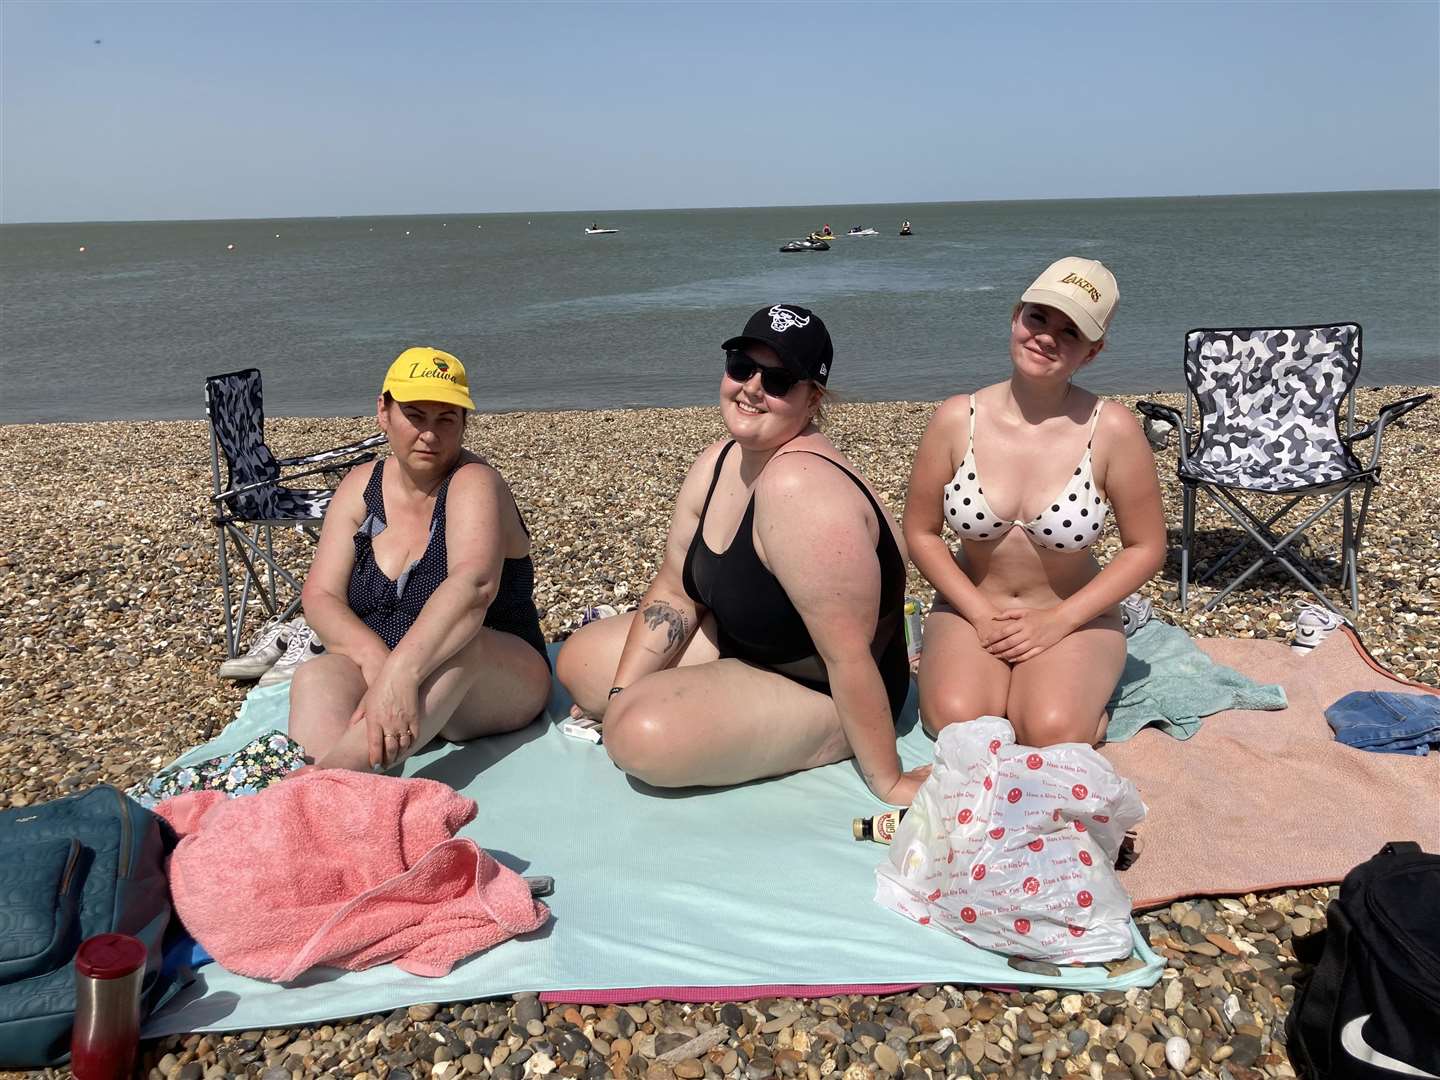 These three for East London avoided Southend and picked the sun-kissed Isle of Sheppey to spend the hottest day of the year so far. They are mum Vilma Bakeviciene, her daugher Karolina Bakeviciute and her friend Lurdita Saiaukaite